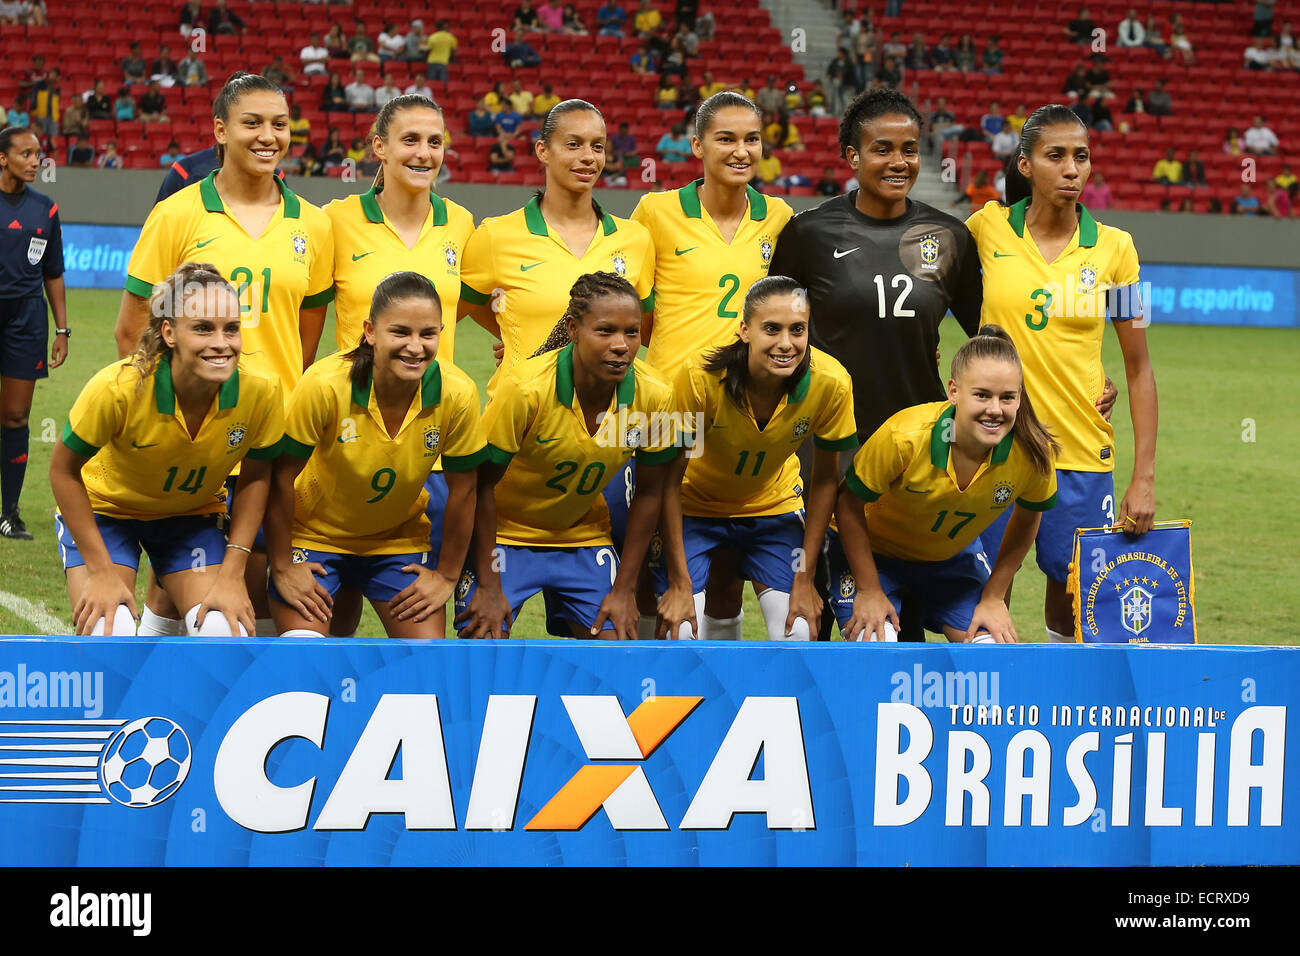 Brasilia, Brazil. 18th Dec, 2014. Brazil's start players pose for a photo prior to a match between China and Brazil of the 2014 International Tournament of Brasilia in Brasilia, capital of Brazil, Dec. 18, 2014. Brazil won 4-1. © Xu Zijian/Xinhua/Alamy Live News Stock Photo